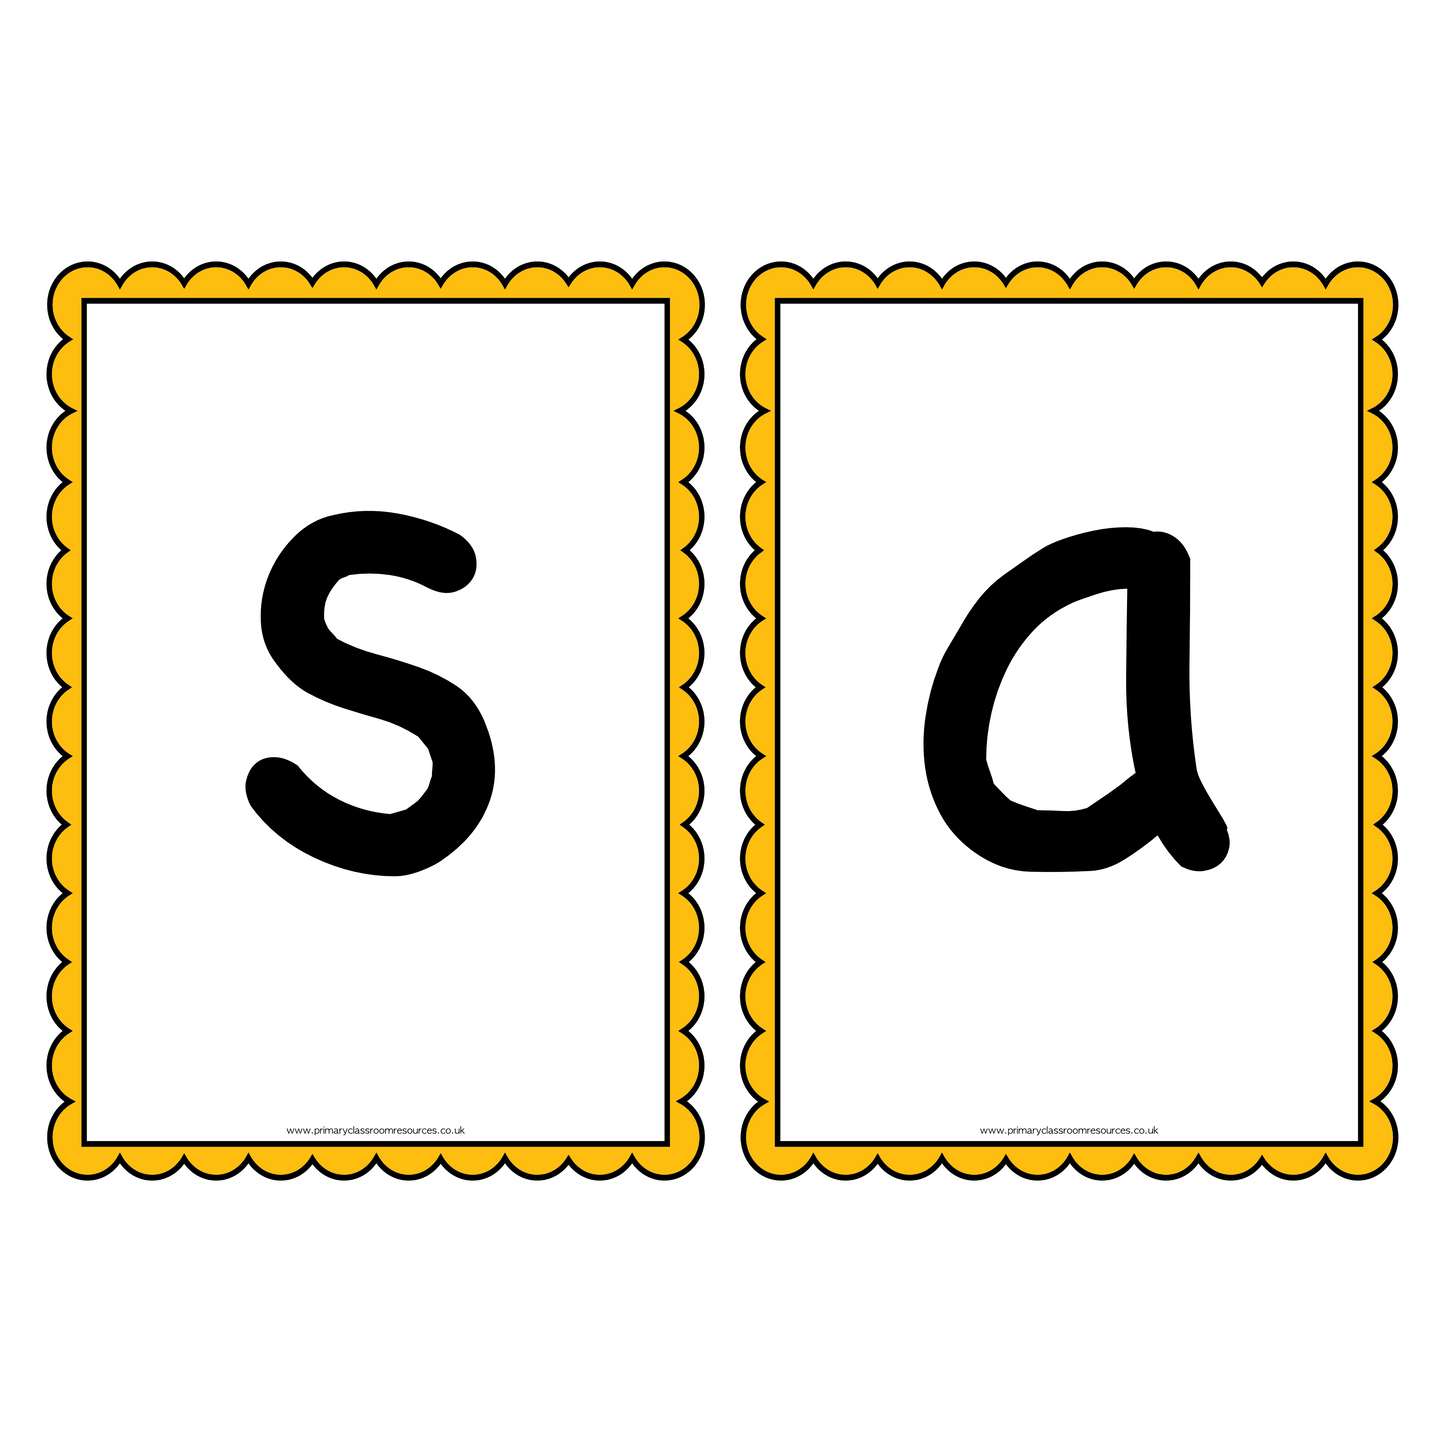 SATPIN Pack - Letters & Sounds Phase 2:Primary Classroom Resources